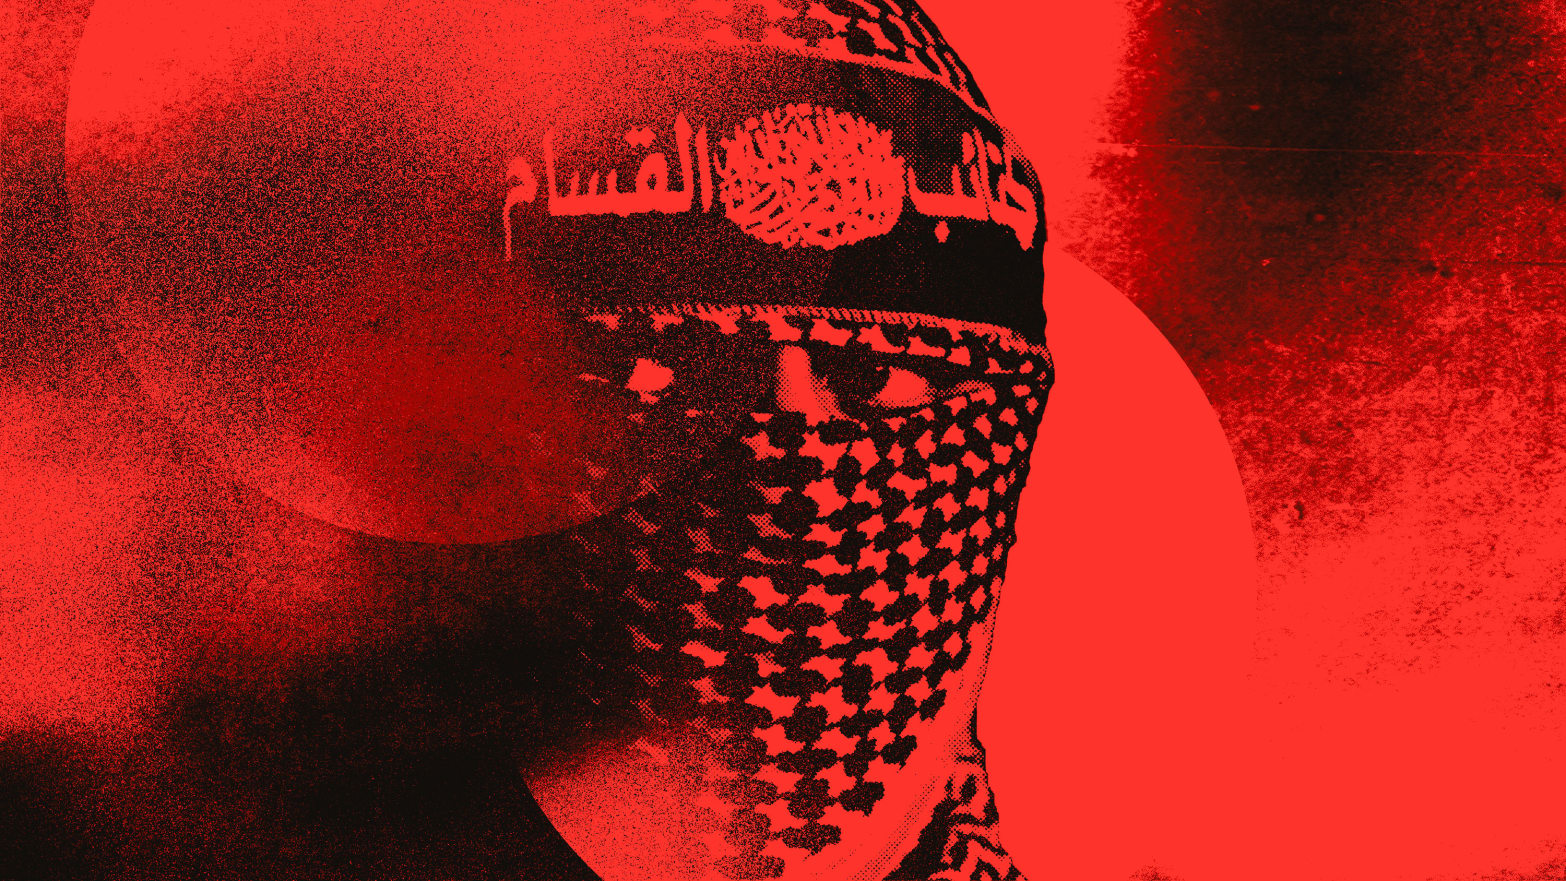 A photo illustration of Abu Obeida in red and black.